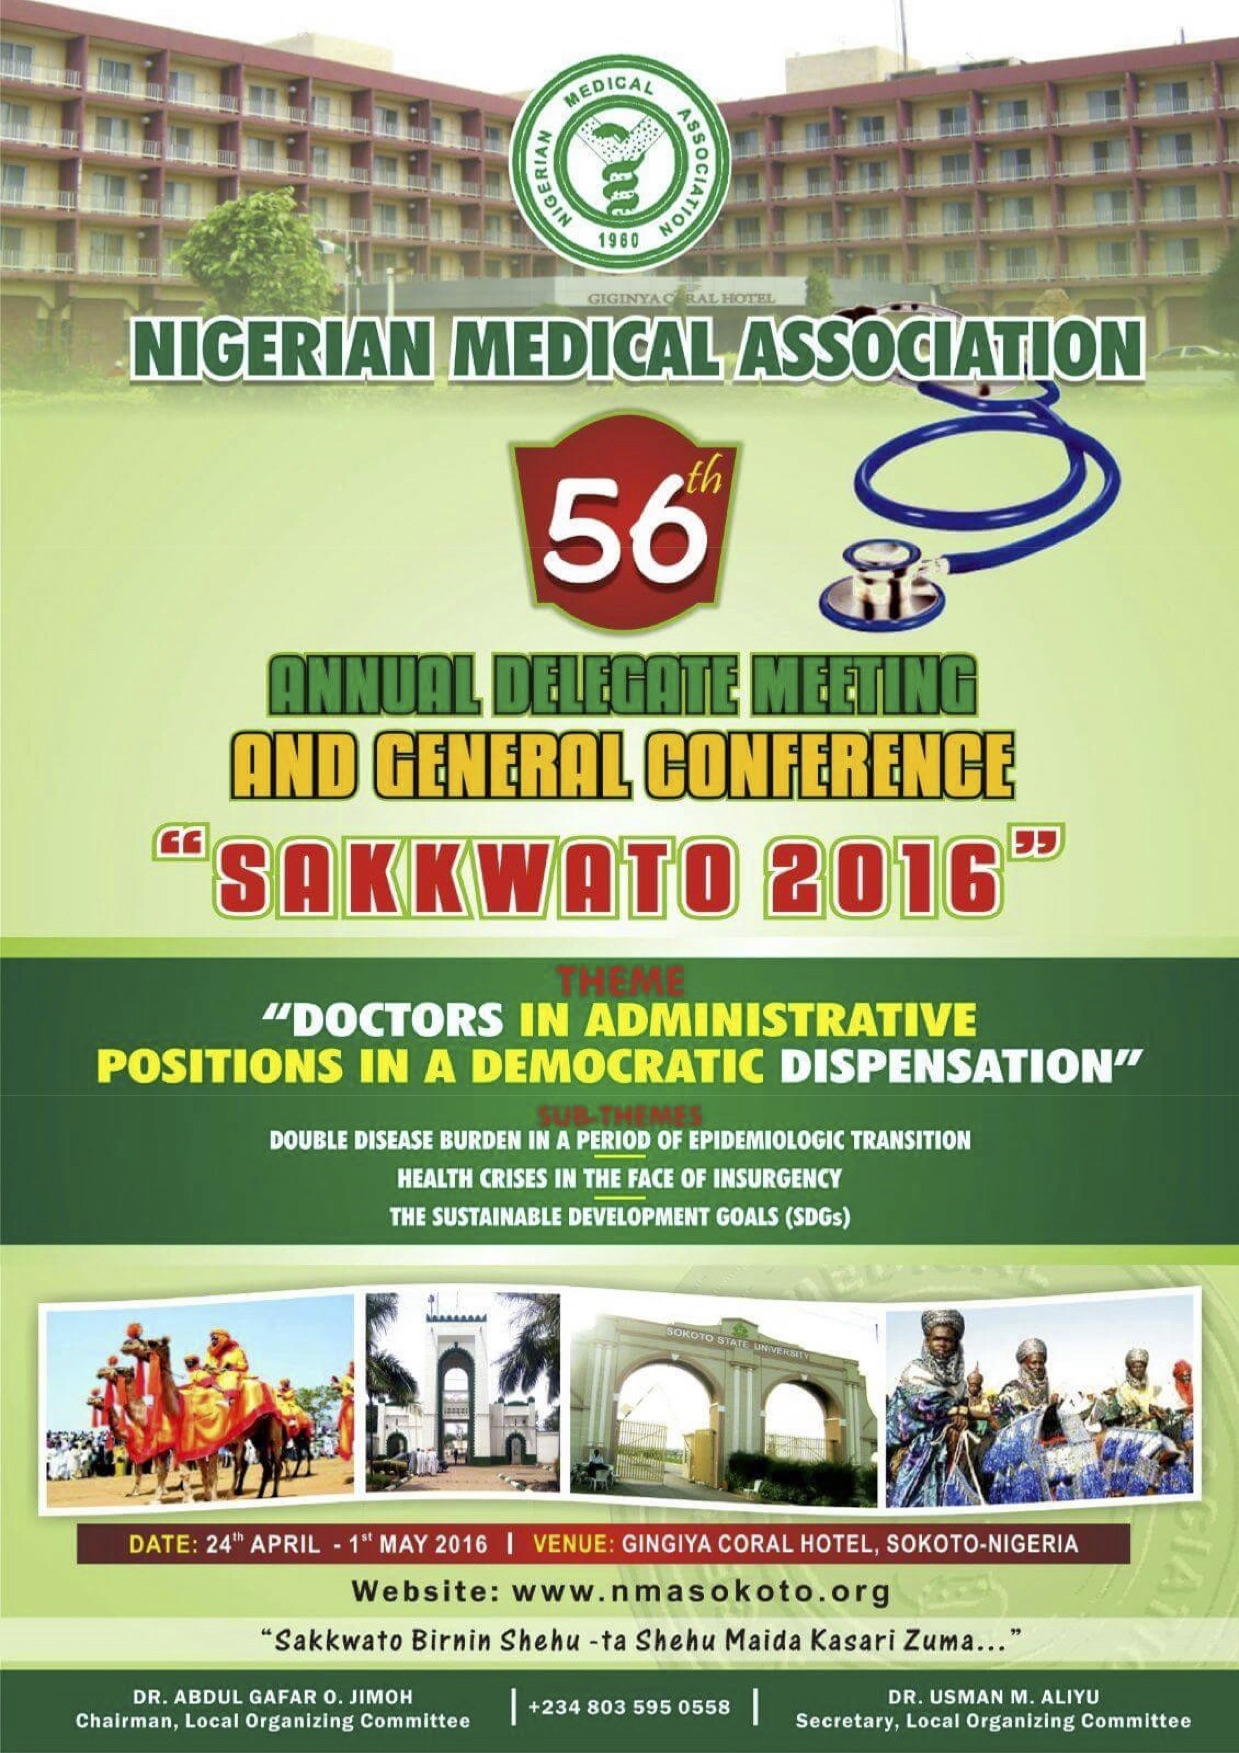 NMA 56th Annual Delegate Meeting and General Conference DokiLink